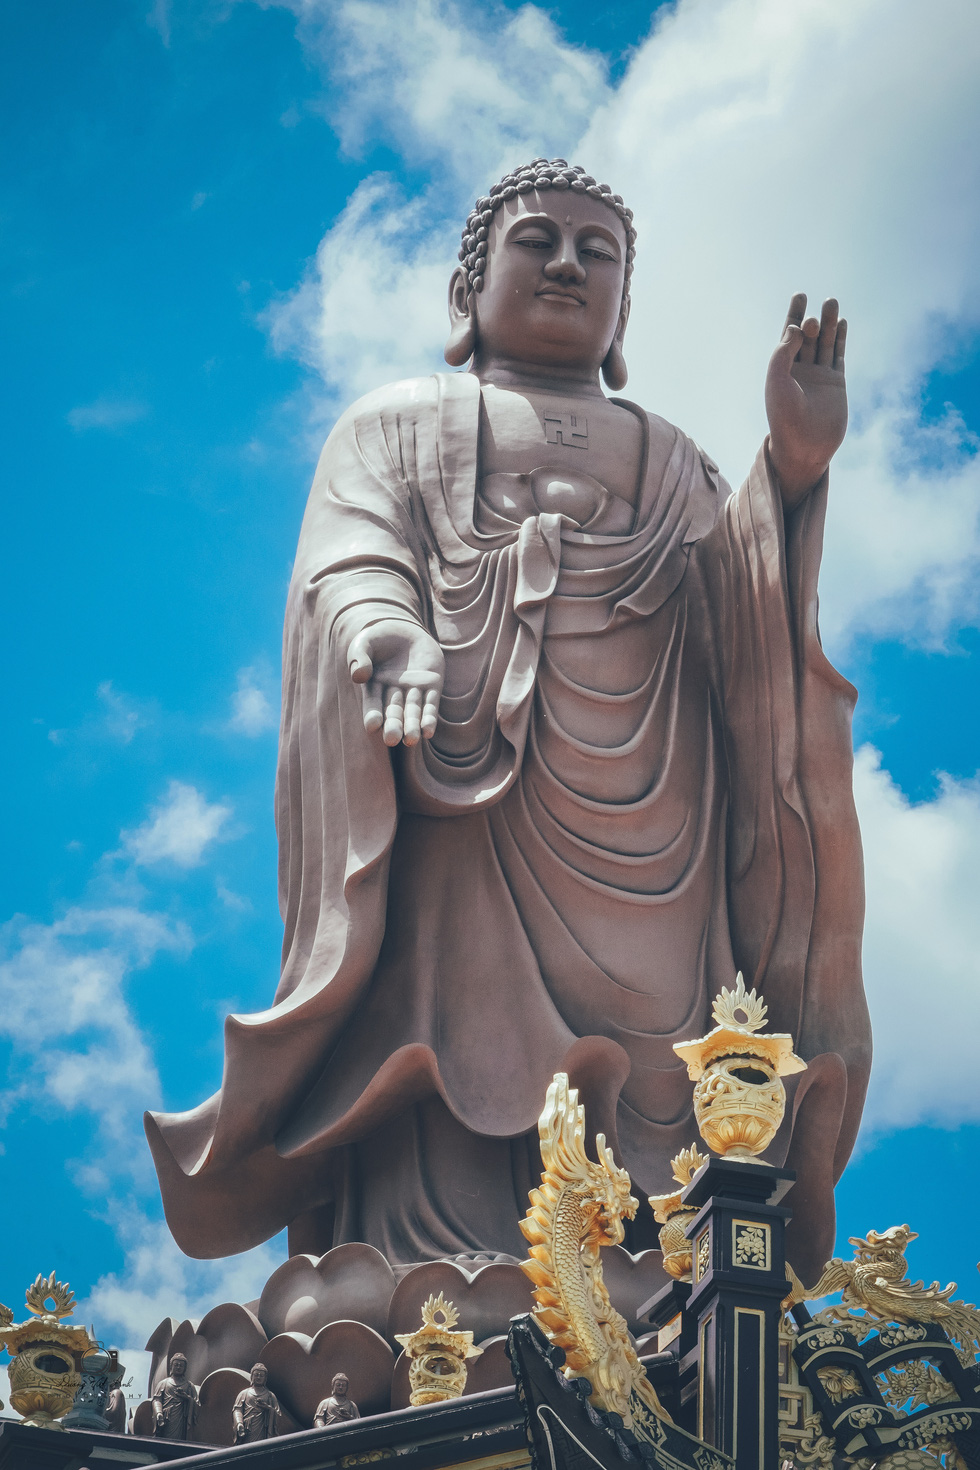 The highlight of Kim Tien Pagoda is the 24-meter-tall Amitabha Buddha statue, built on the roof of the pagoda. The statue exudes sacredness, reverence, serenity, and peace. Photo: Duong Viet Anh / Tuoi Tre